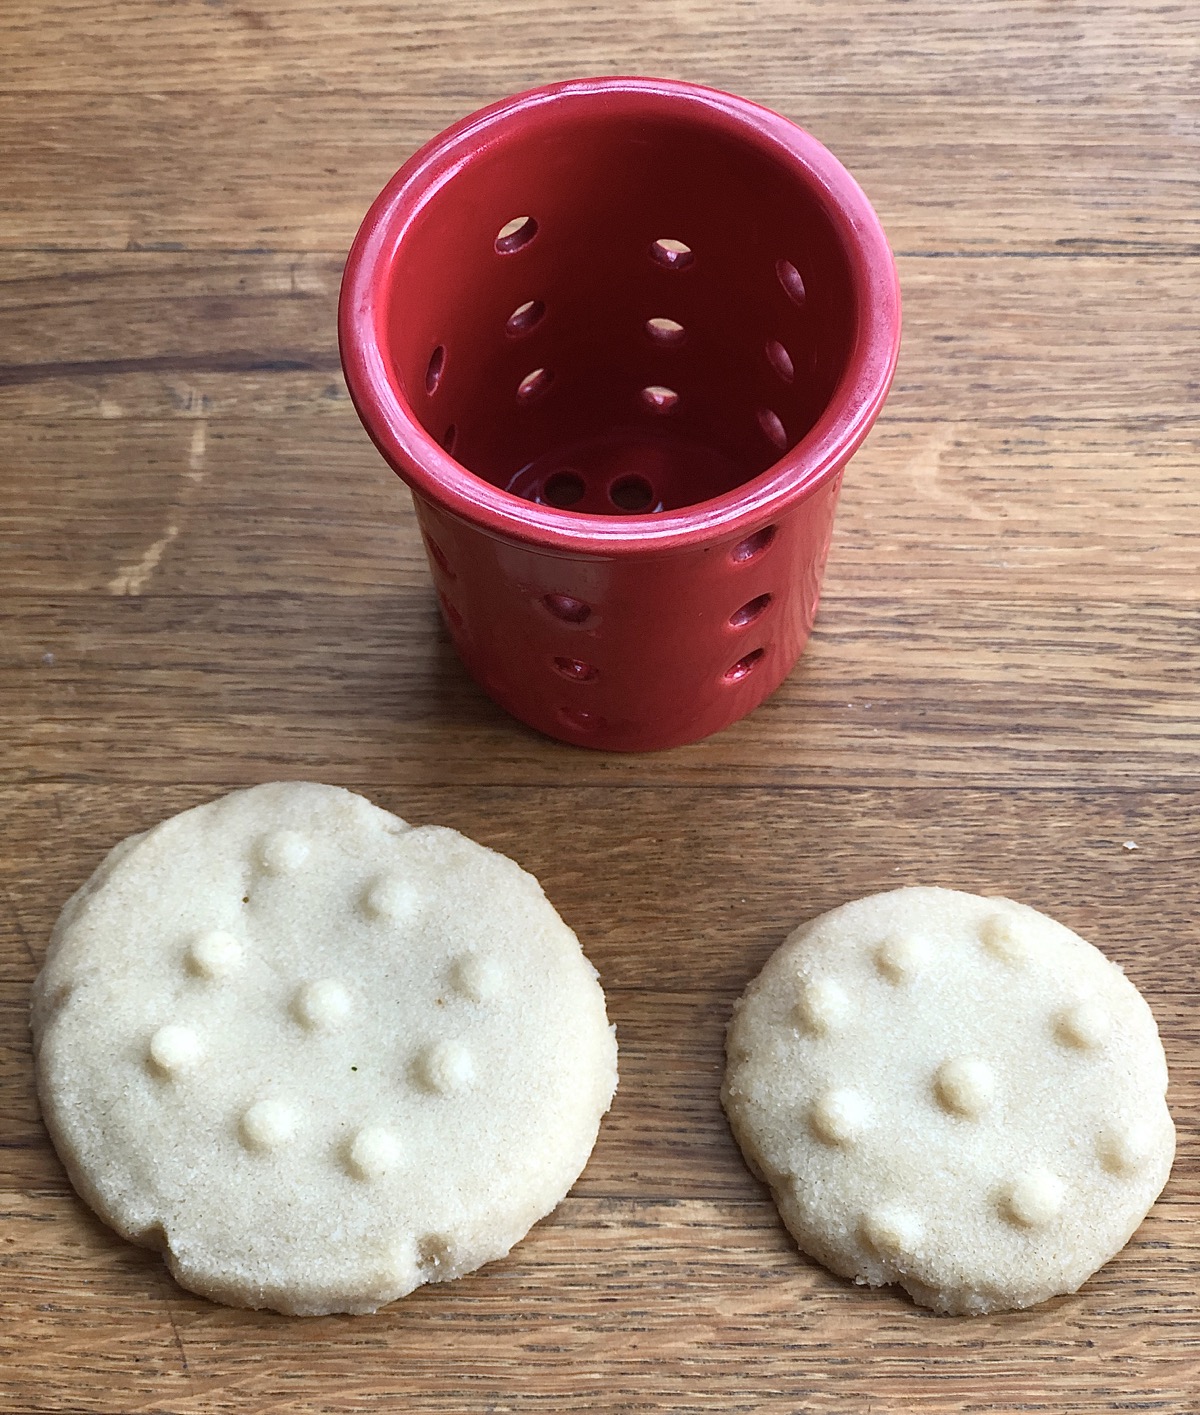 Two chocolate cookies on a table, one large, one small, showing how the imprint made with a tea strainer covers the small cookie, but only partially covers the large one.